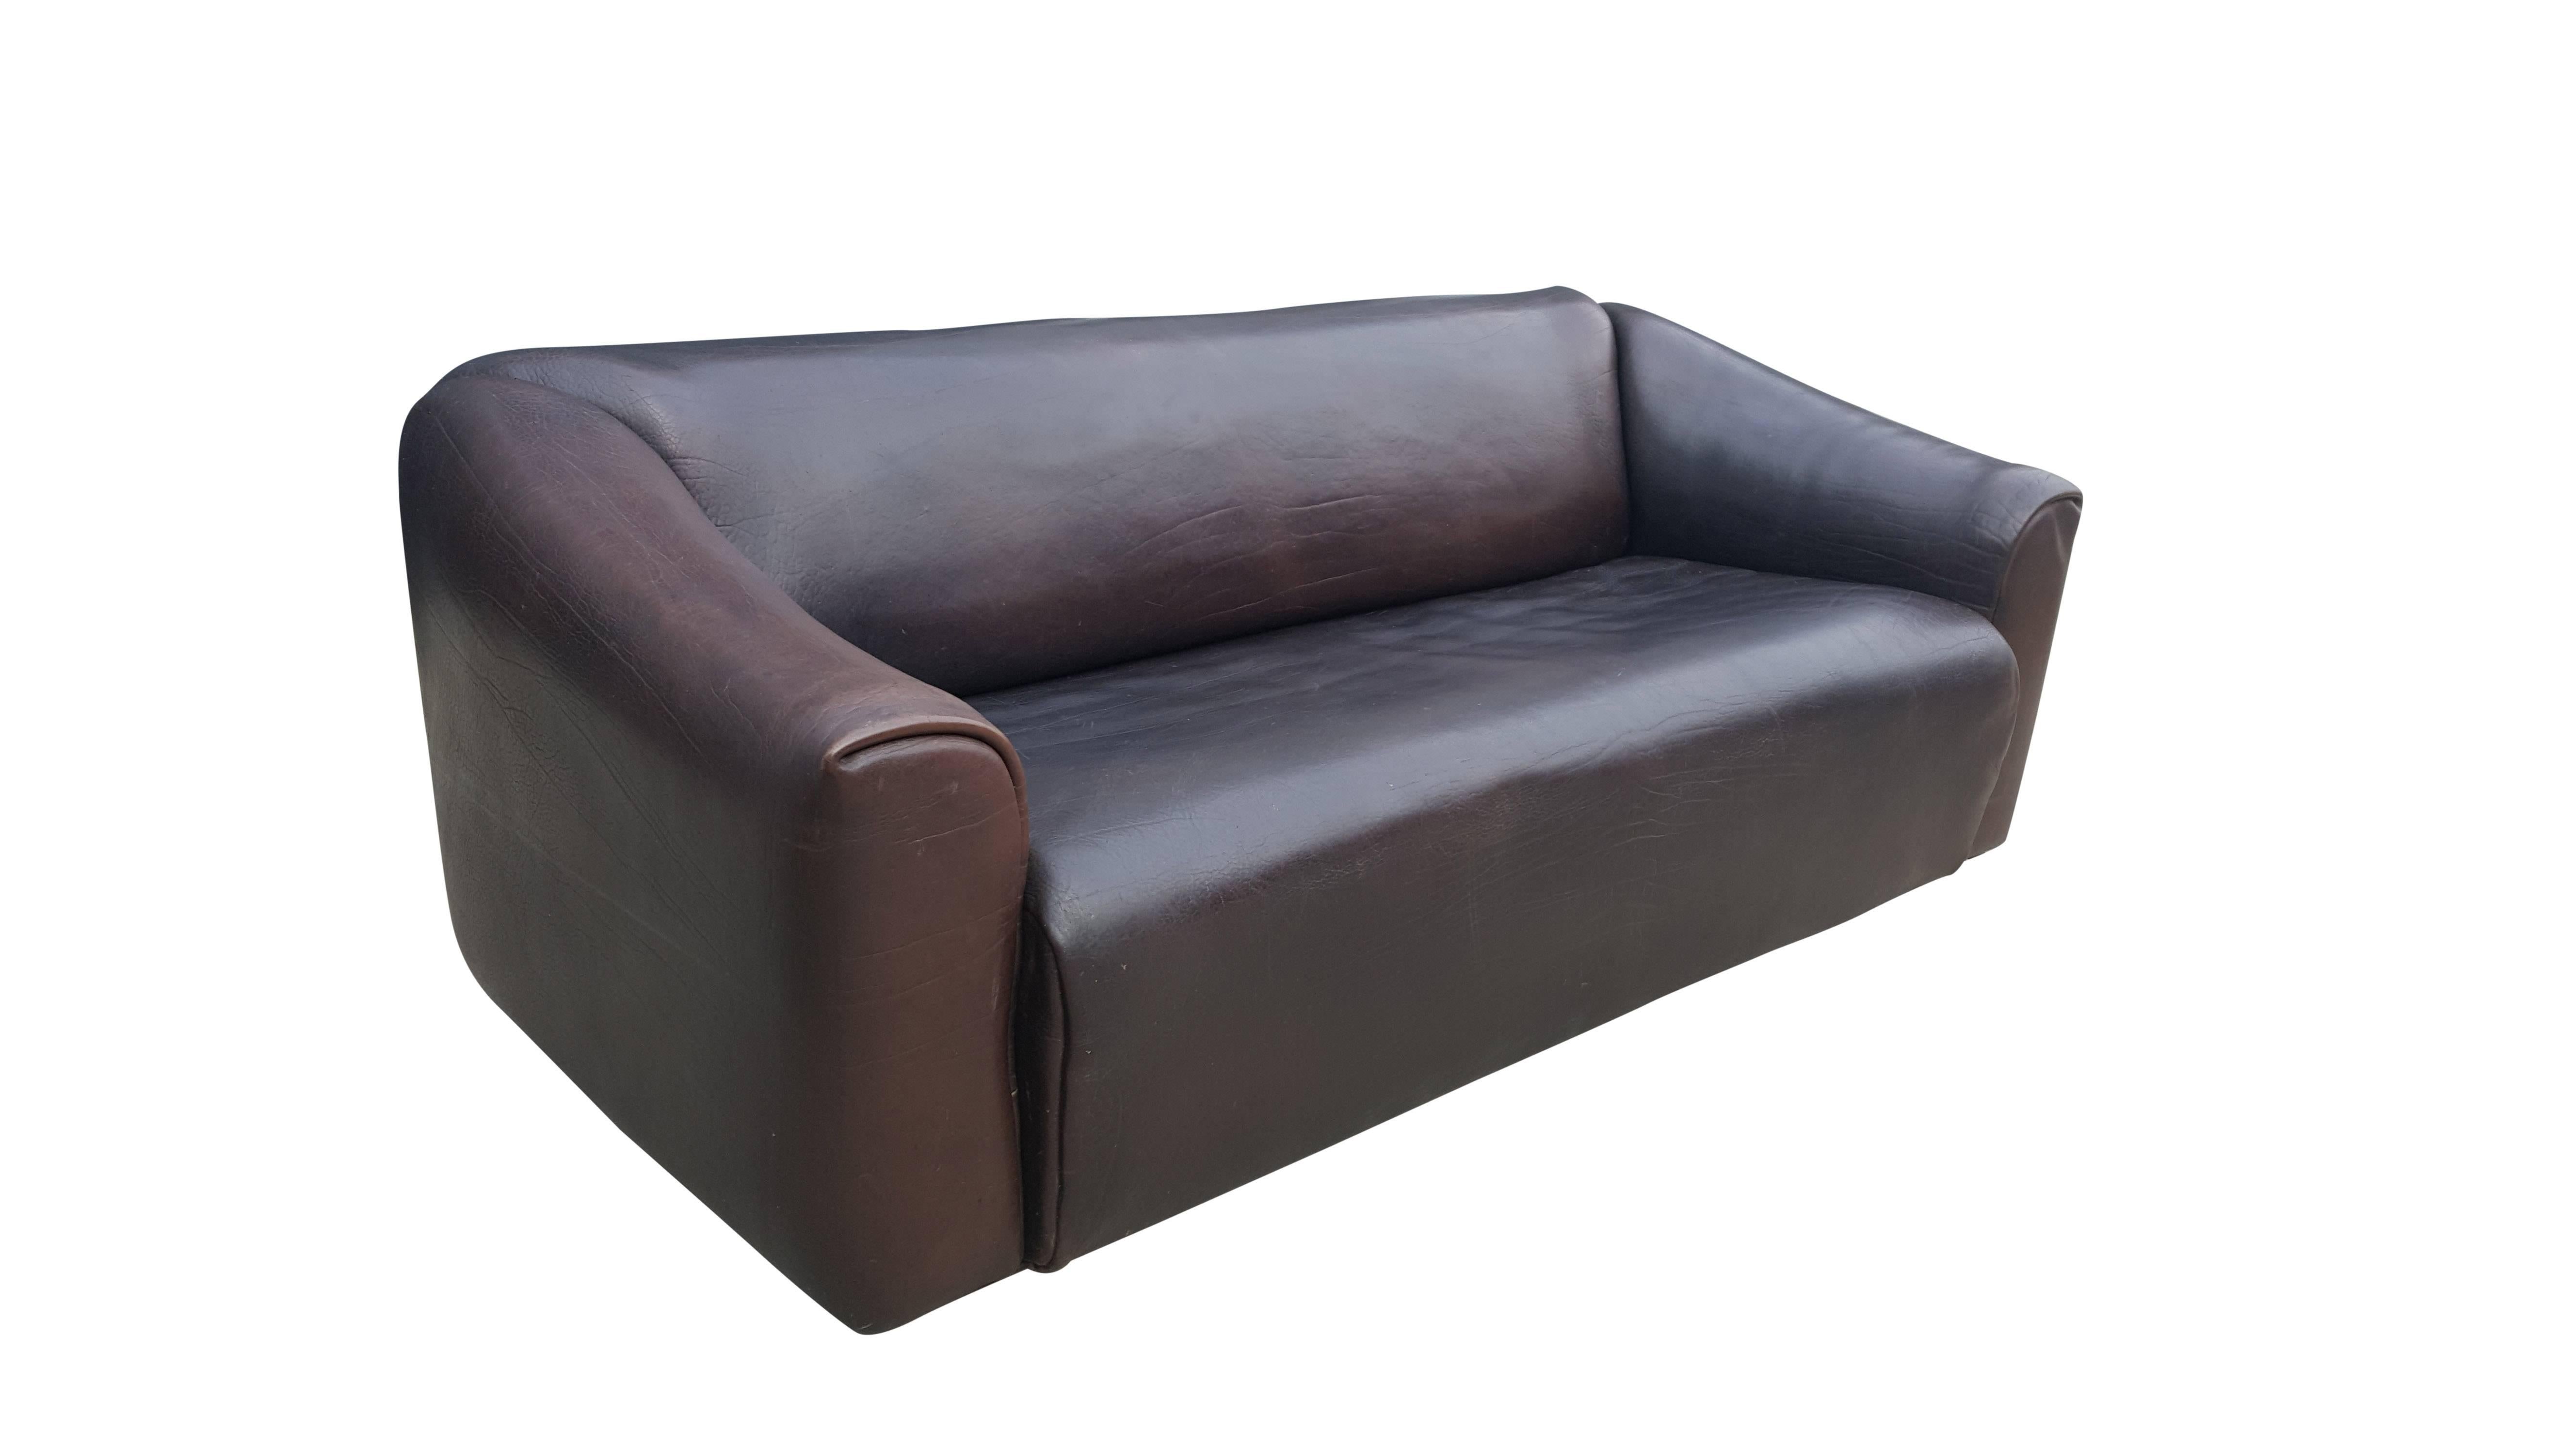 Very rare high quality buffalo leather sofa from De Sede,
made in Switzerland in the 1970s.
De Sede is known for its supreme quality leather and comfort seating.
The sofa has an extractable seating for more lounge comfort.
The sofa has a dark